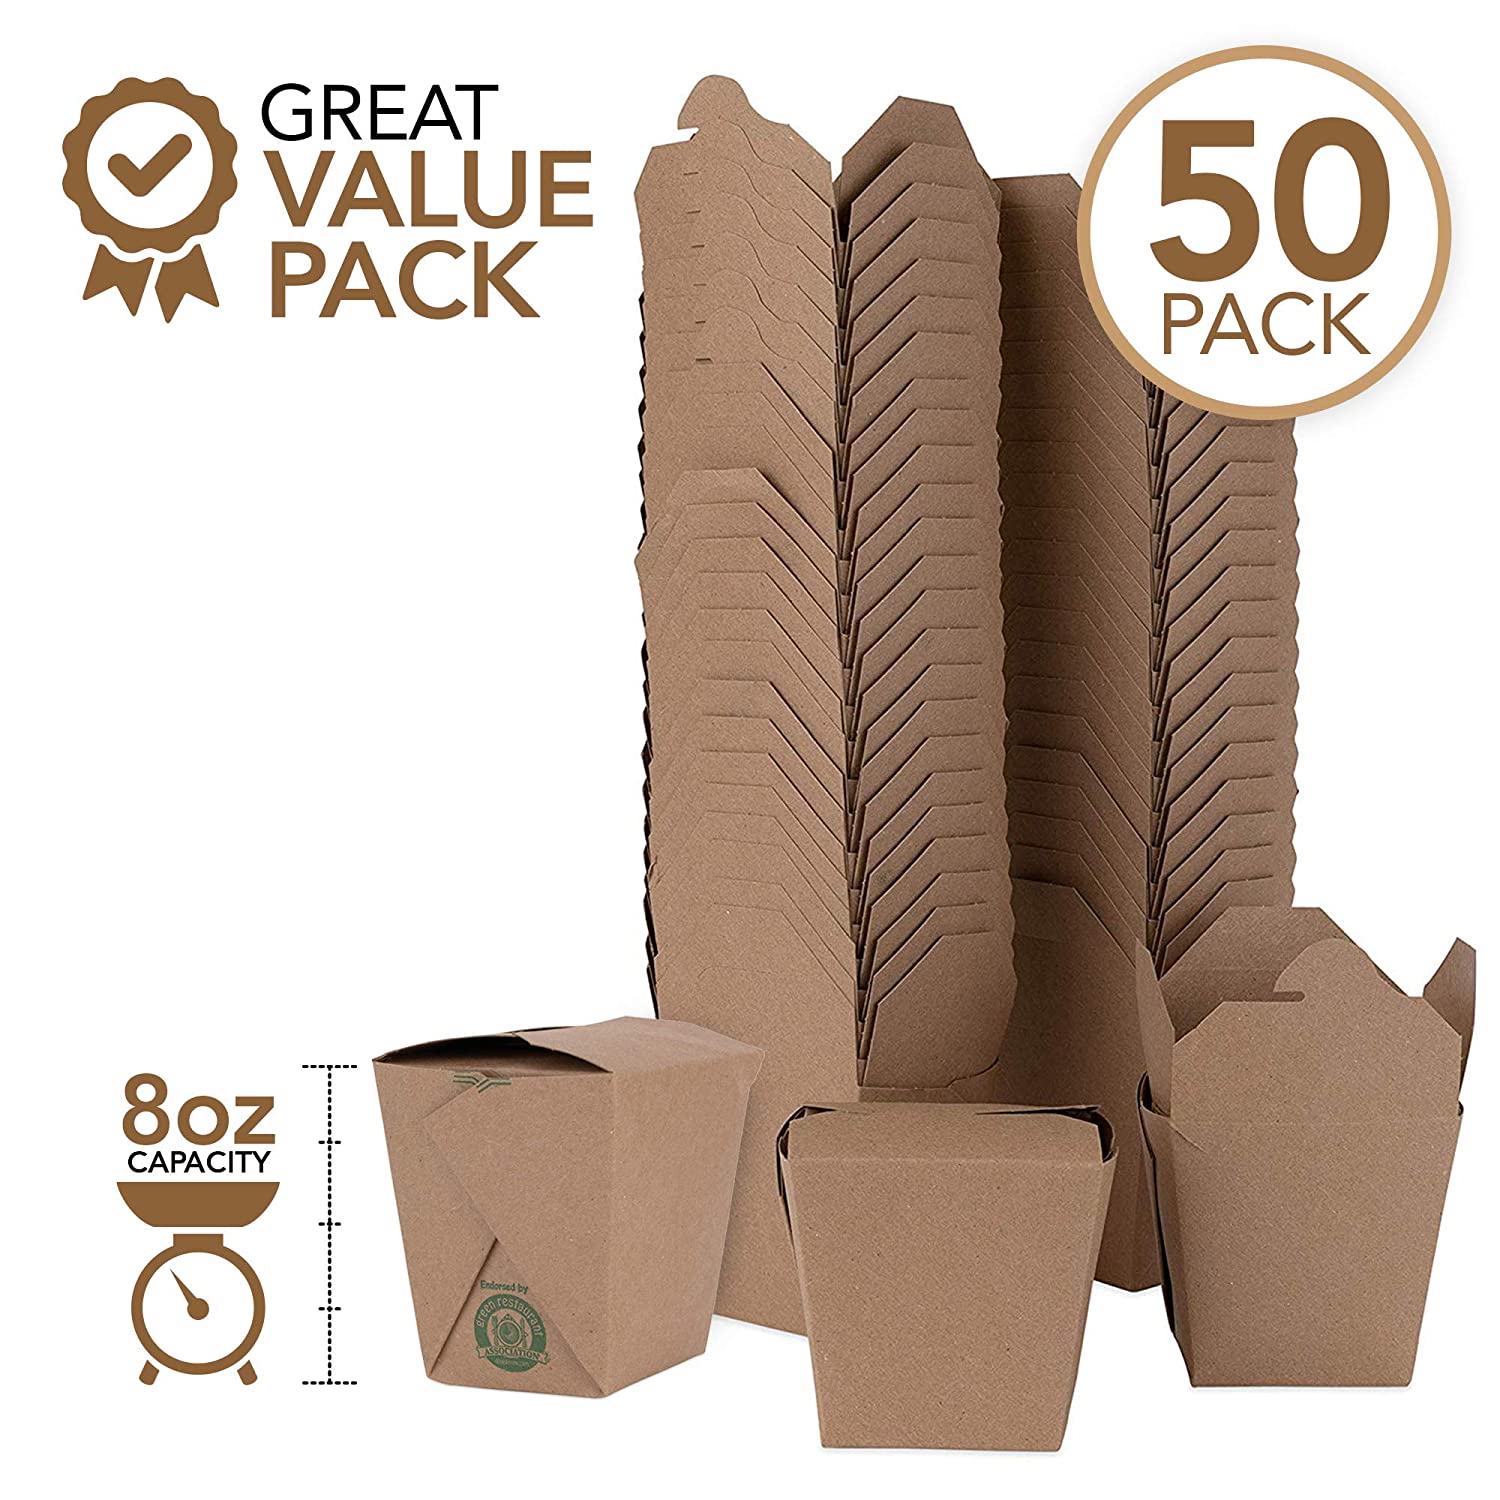 Stock Your Home Takeout Food Containers 8 oz Microwaveable Kraft Brown Paper Mini Chinese Take Out Box (50 Pack) Leak and Grease Resistant Stackable T